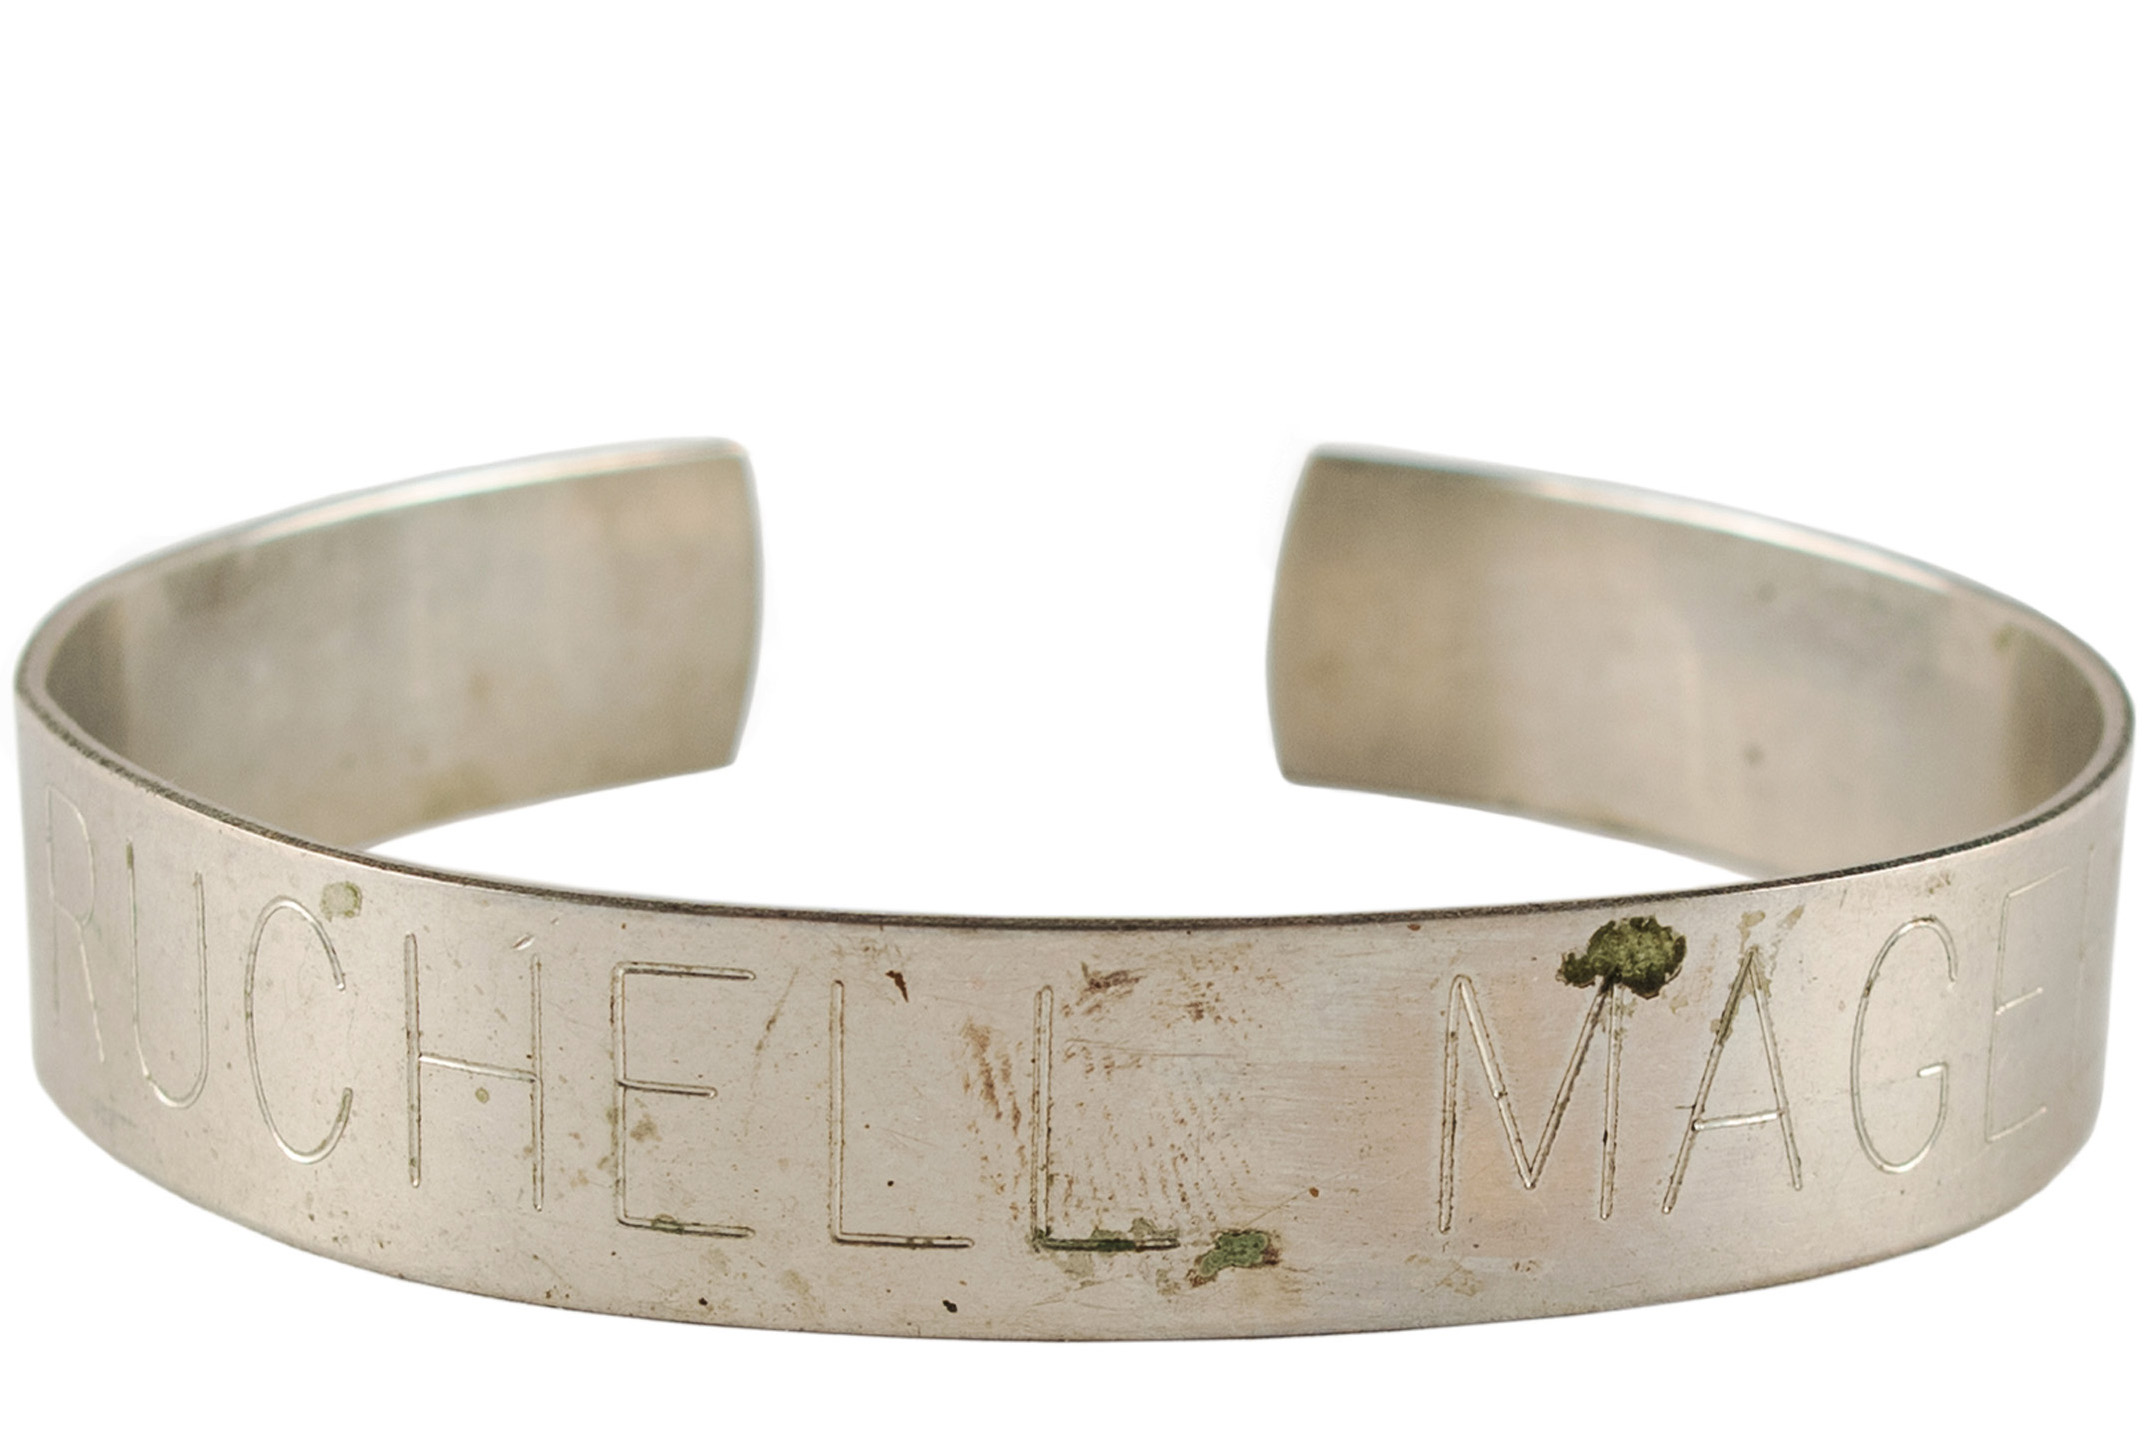 A metal bracelet engraved with the name Ruchell Magee.